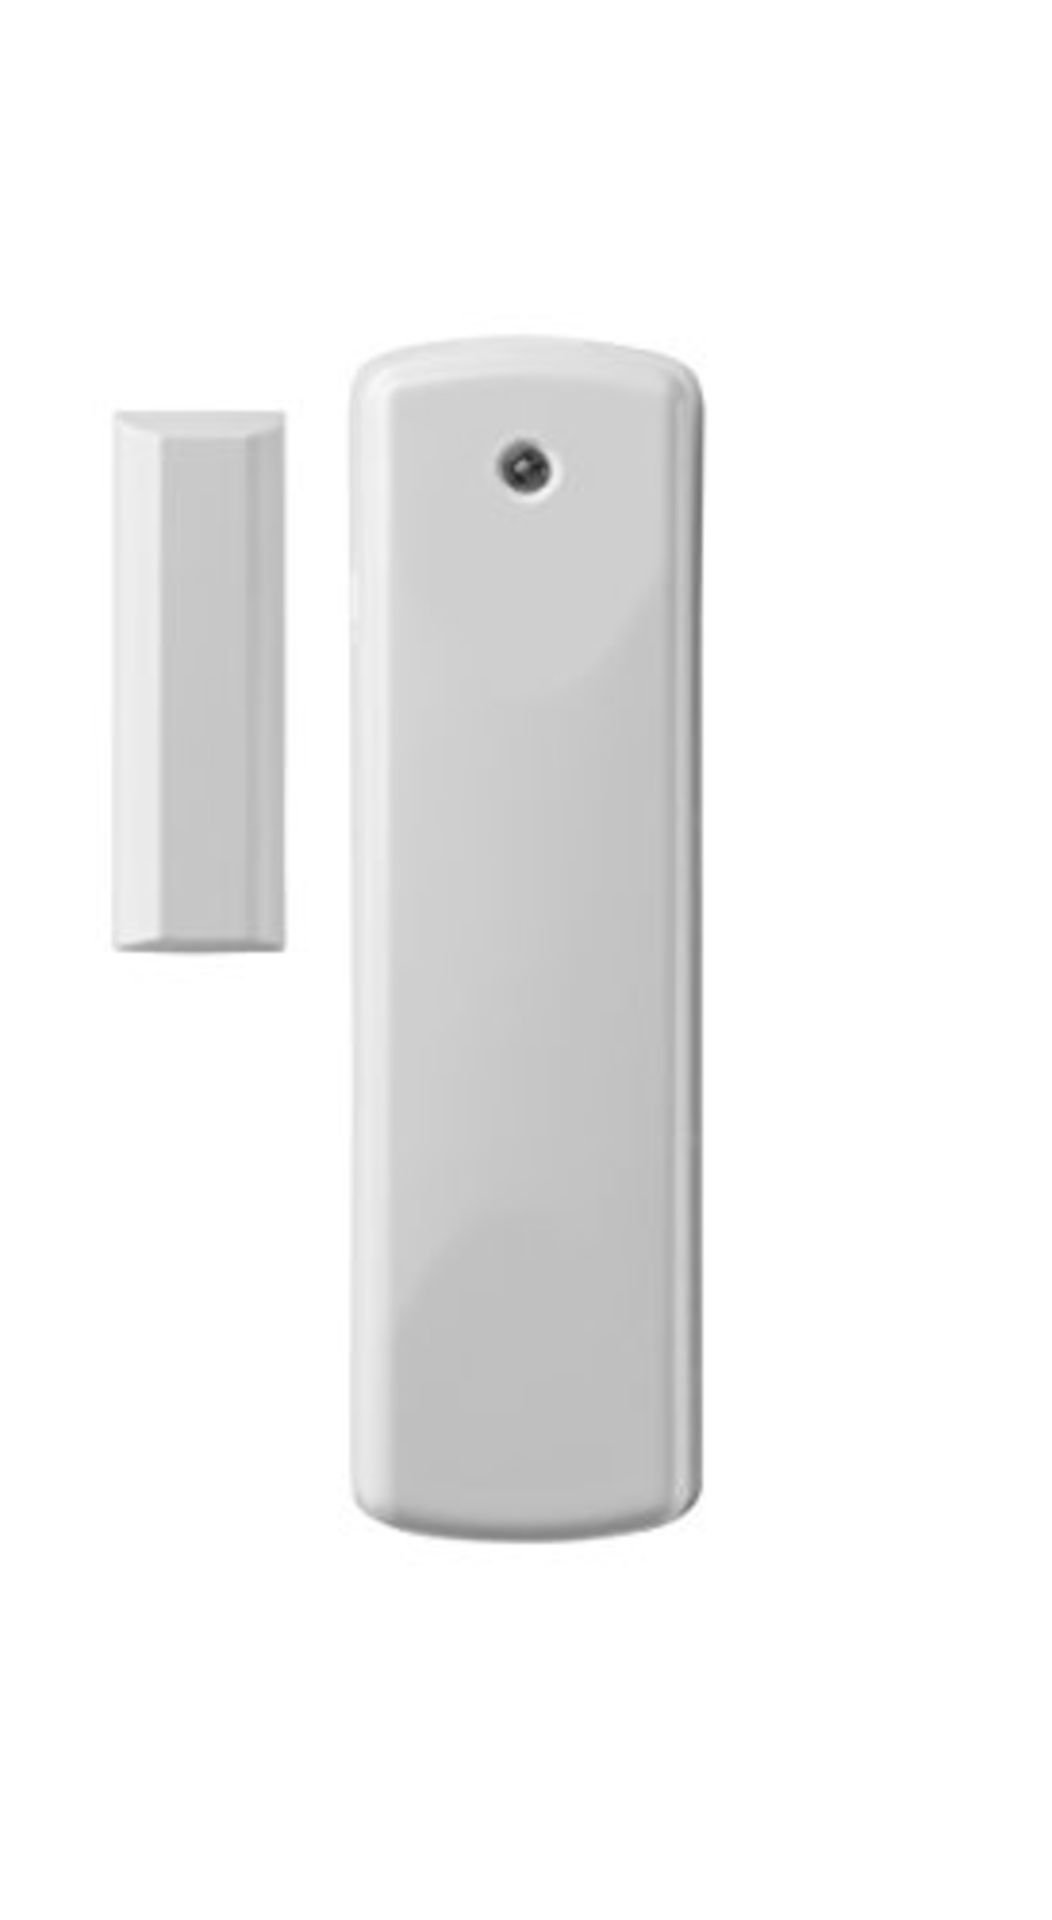 Ecolink Z-Wave Door and Window Sensor with Rare Earth Magnets, Open/Close Indicator, E